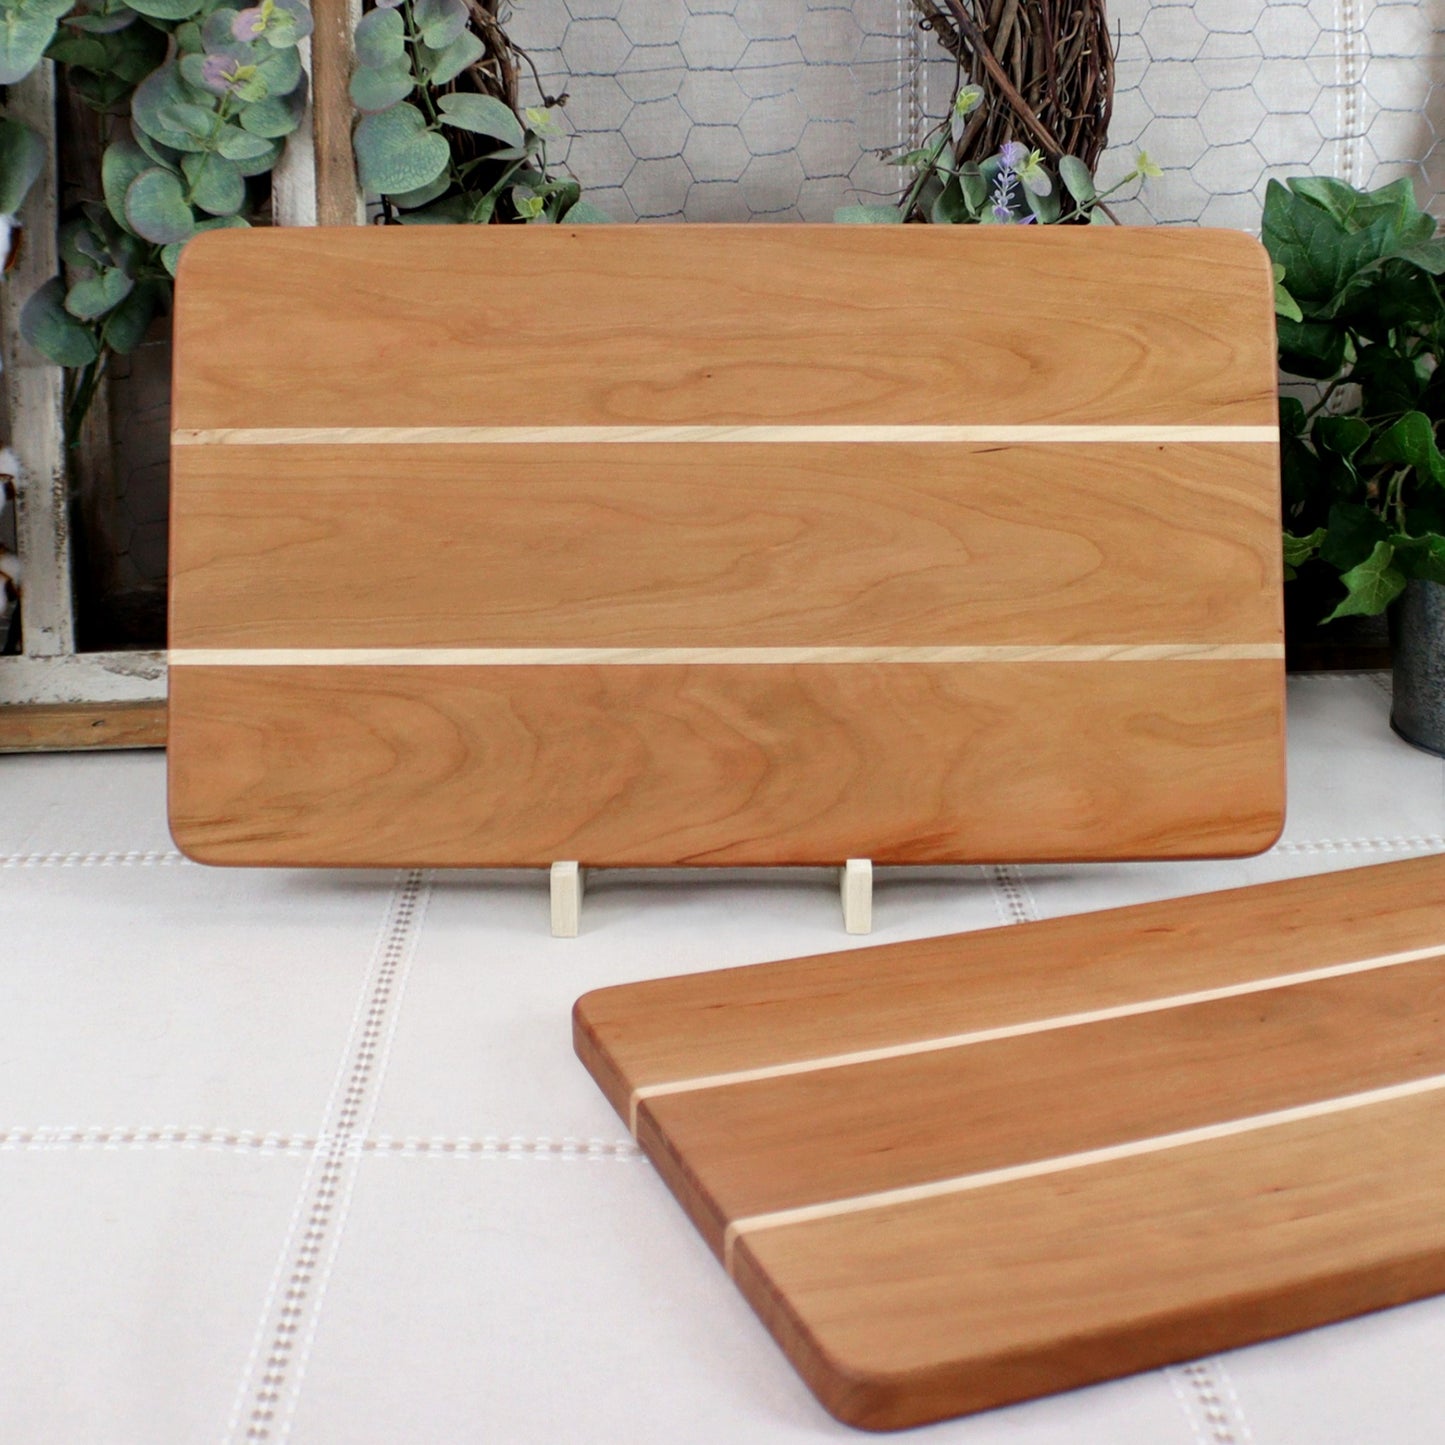 Cherry Wood Cutting Board With Real Maple Wood Inlay